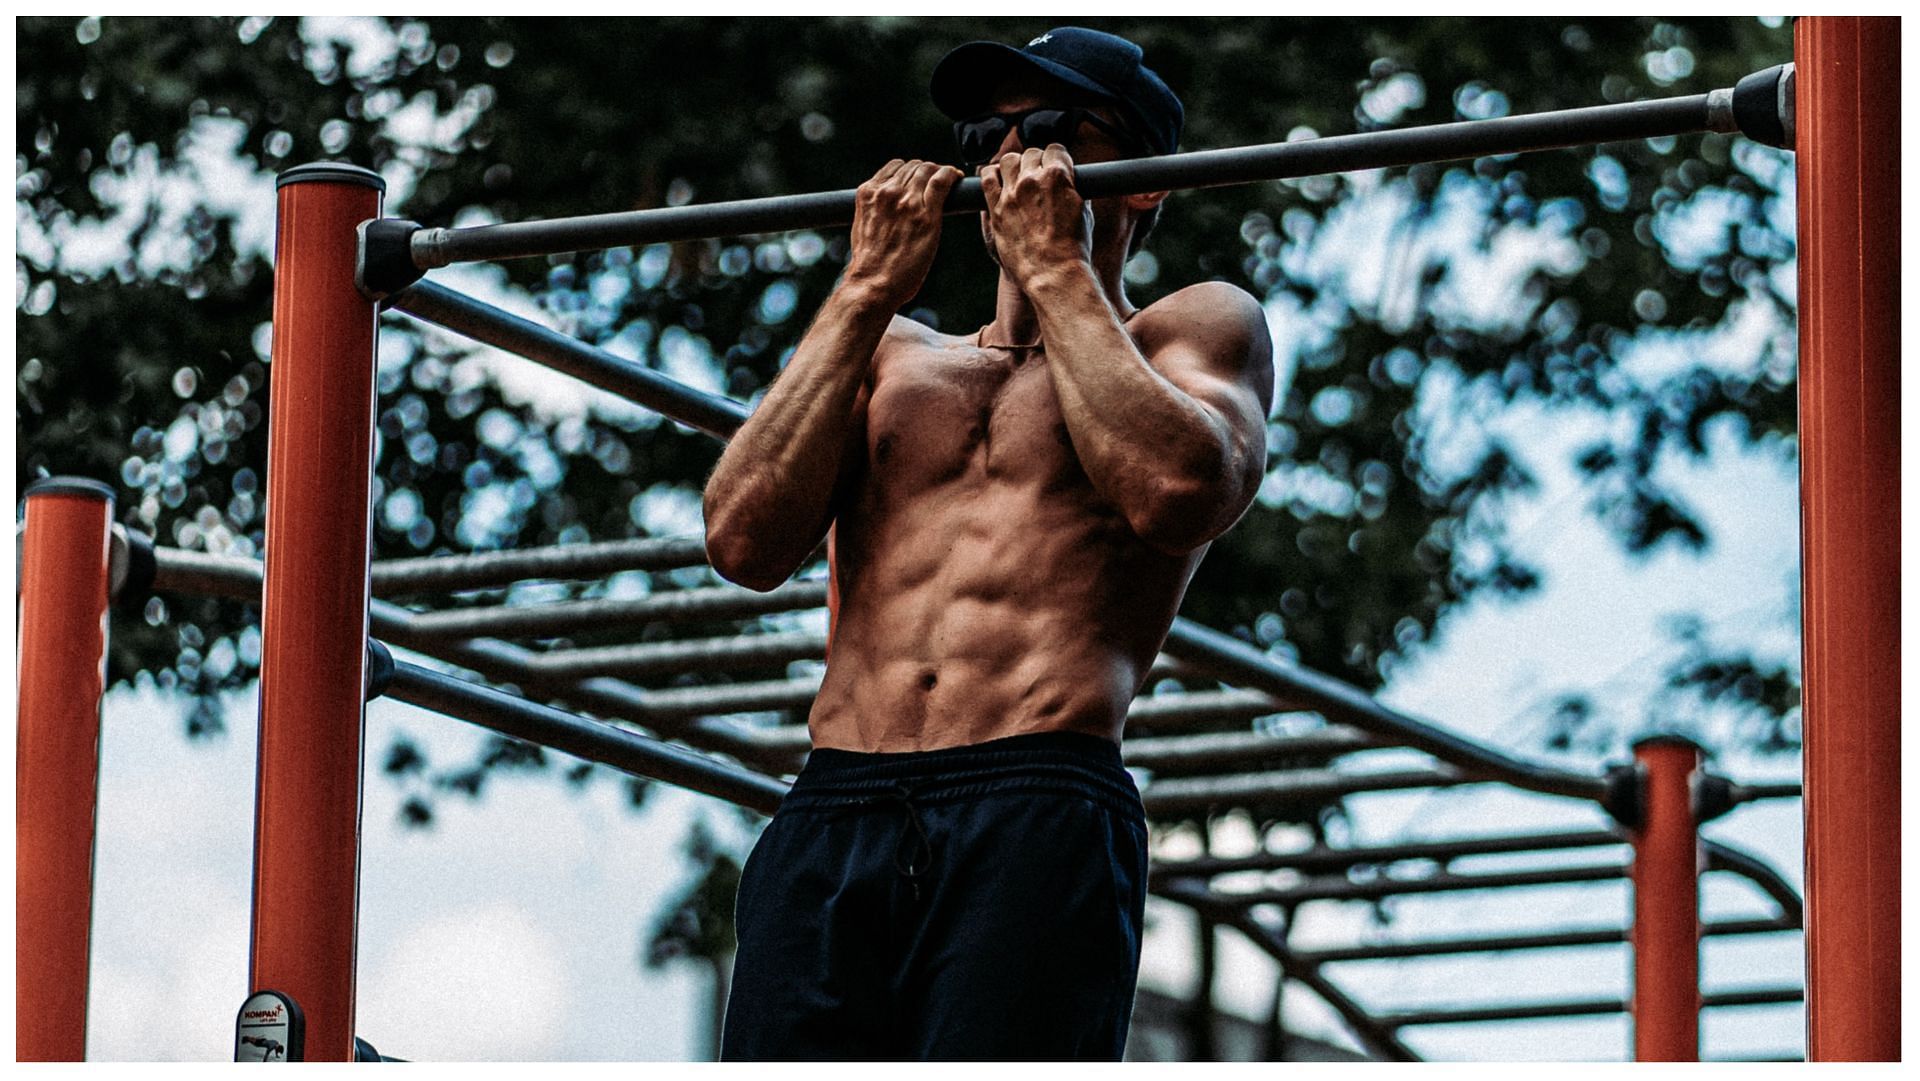 Metabolic exercises for shredded abs can help burn fat from body. (Image via Pexels/Niko Twisty)